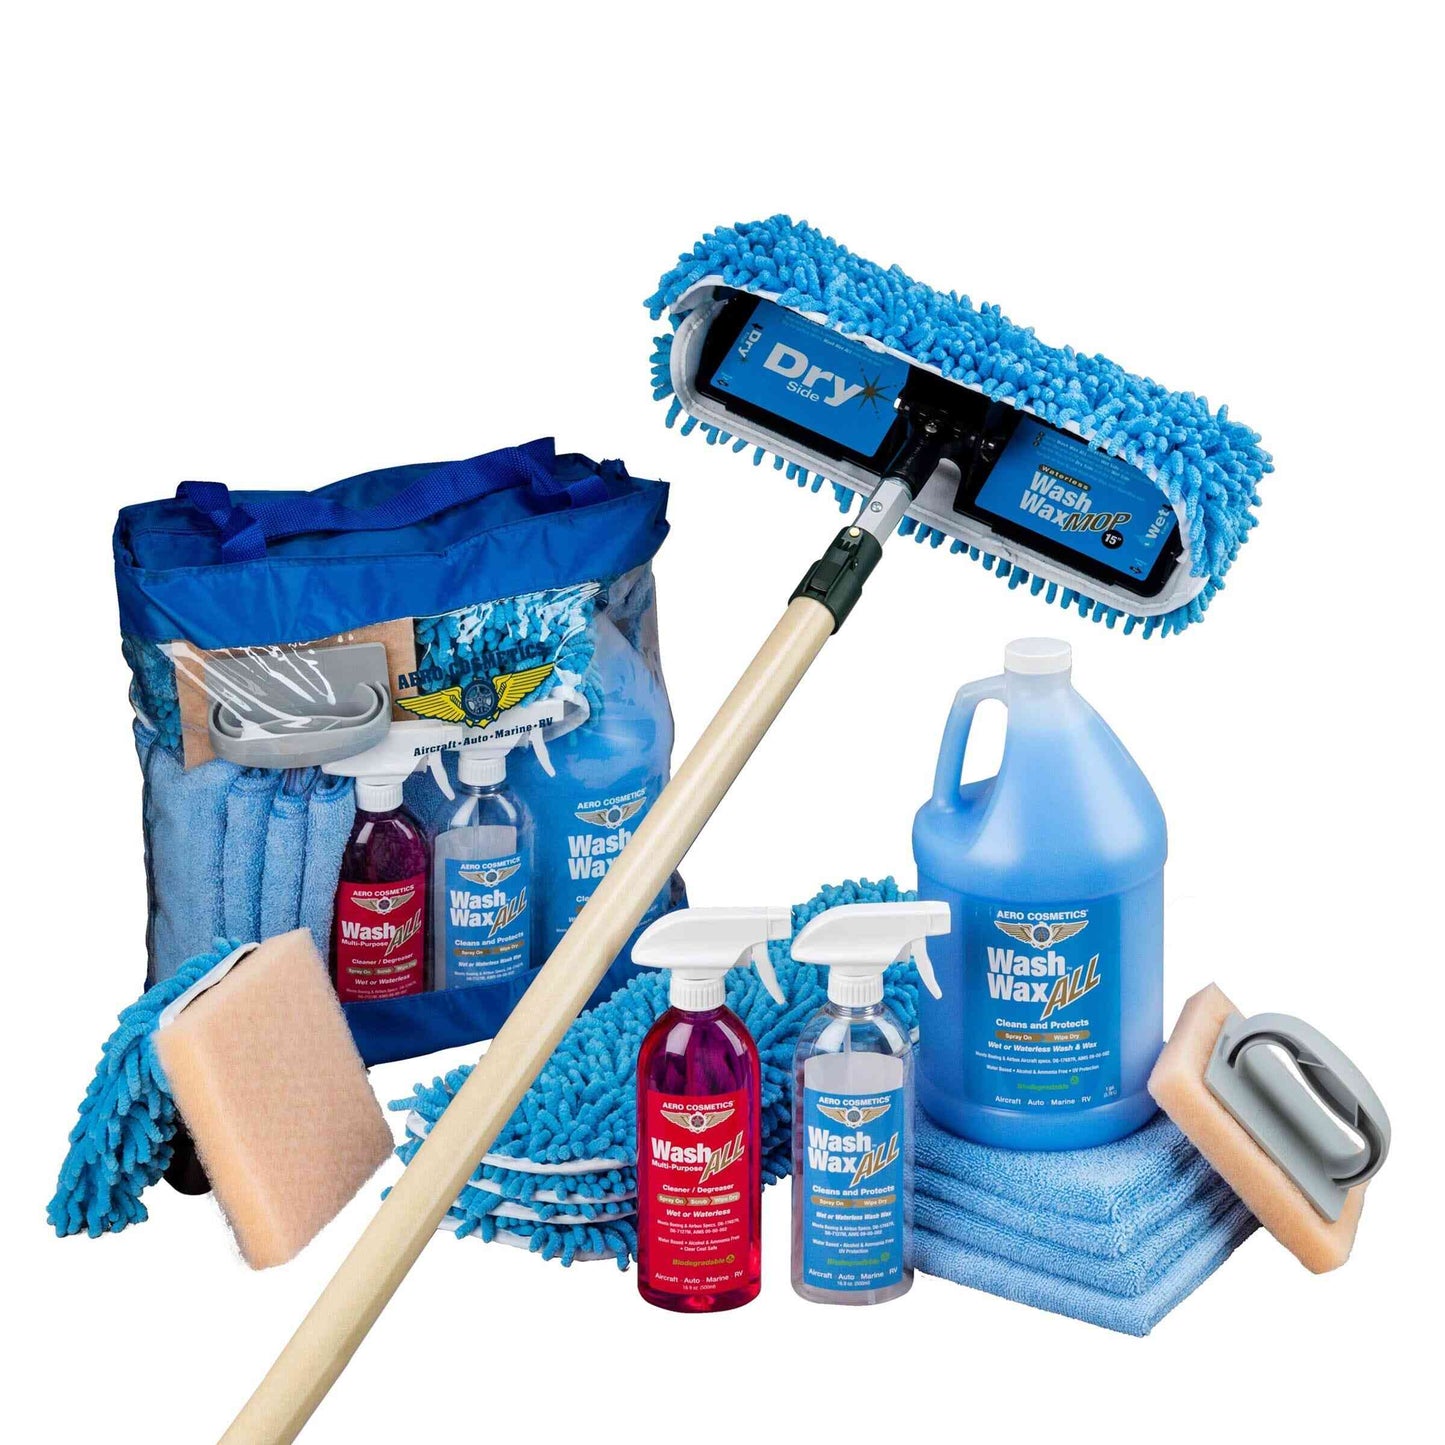 RV Cleaning Washing Waterless Wash Wax Mop Kit with Mini Bug Scrubber Mop